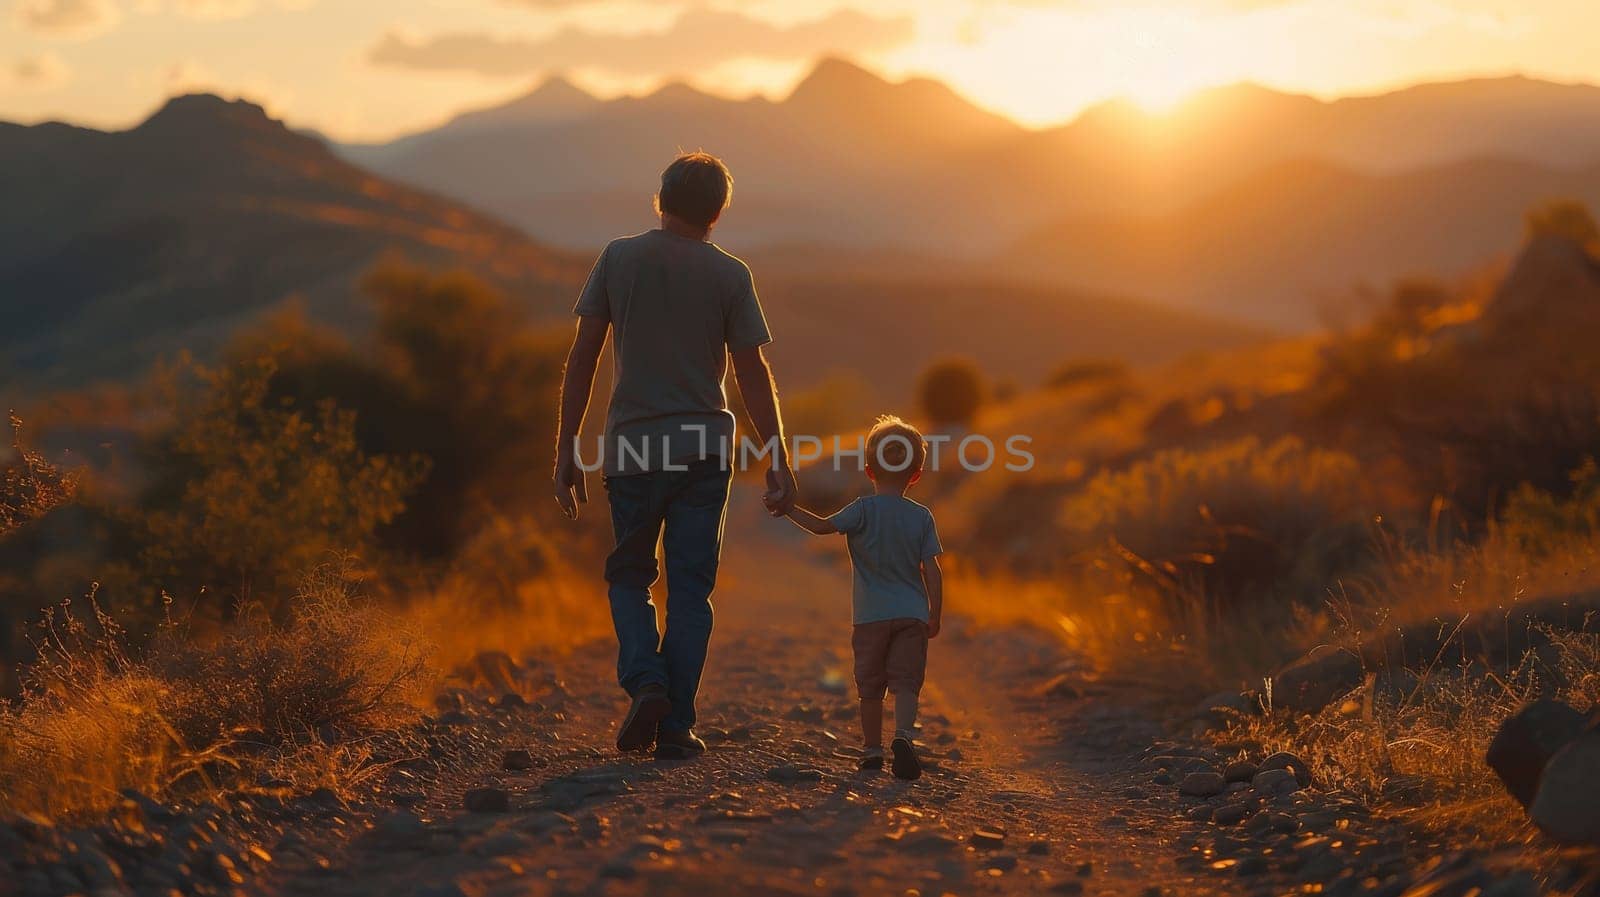 A man and a child are walking together in a desert by itchaznong